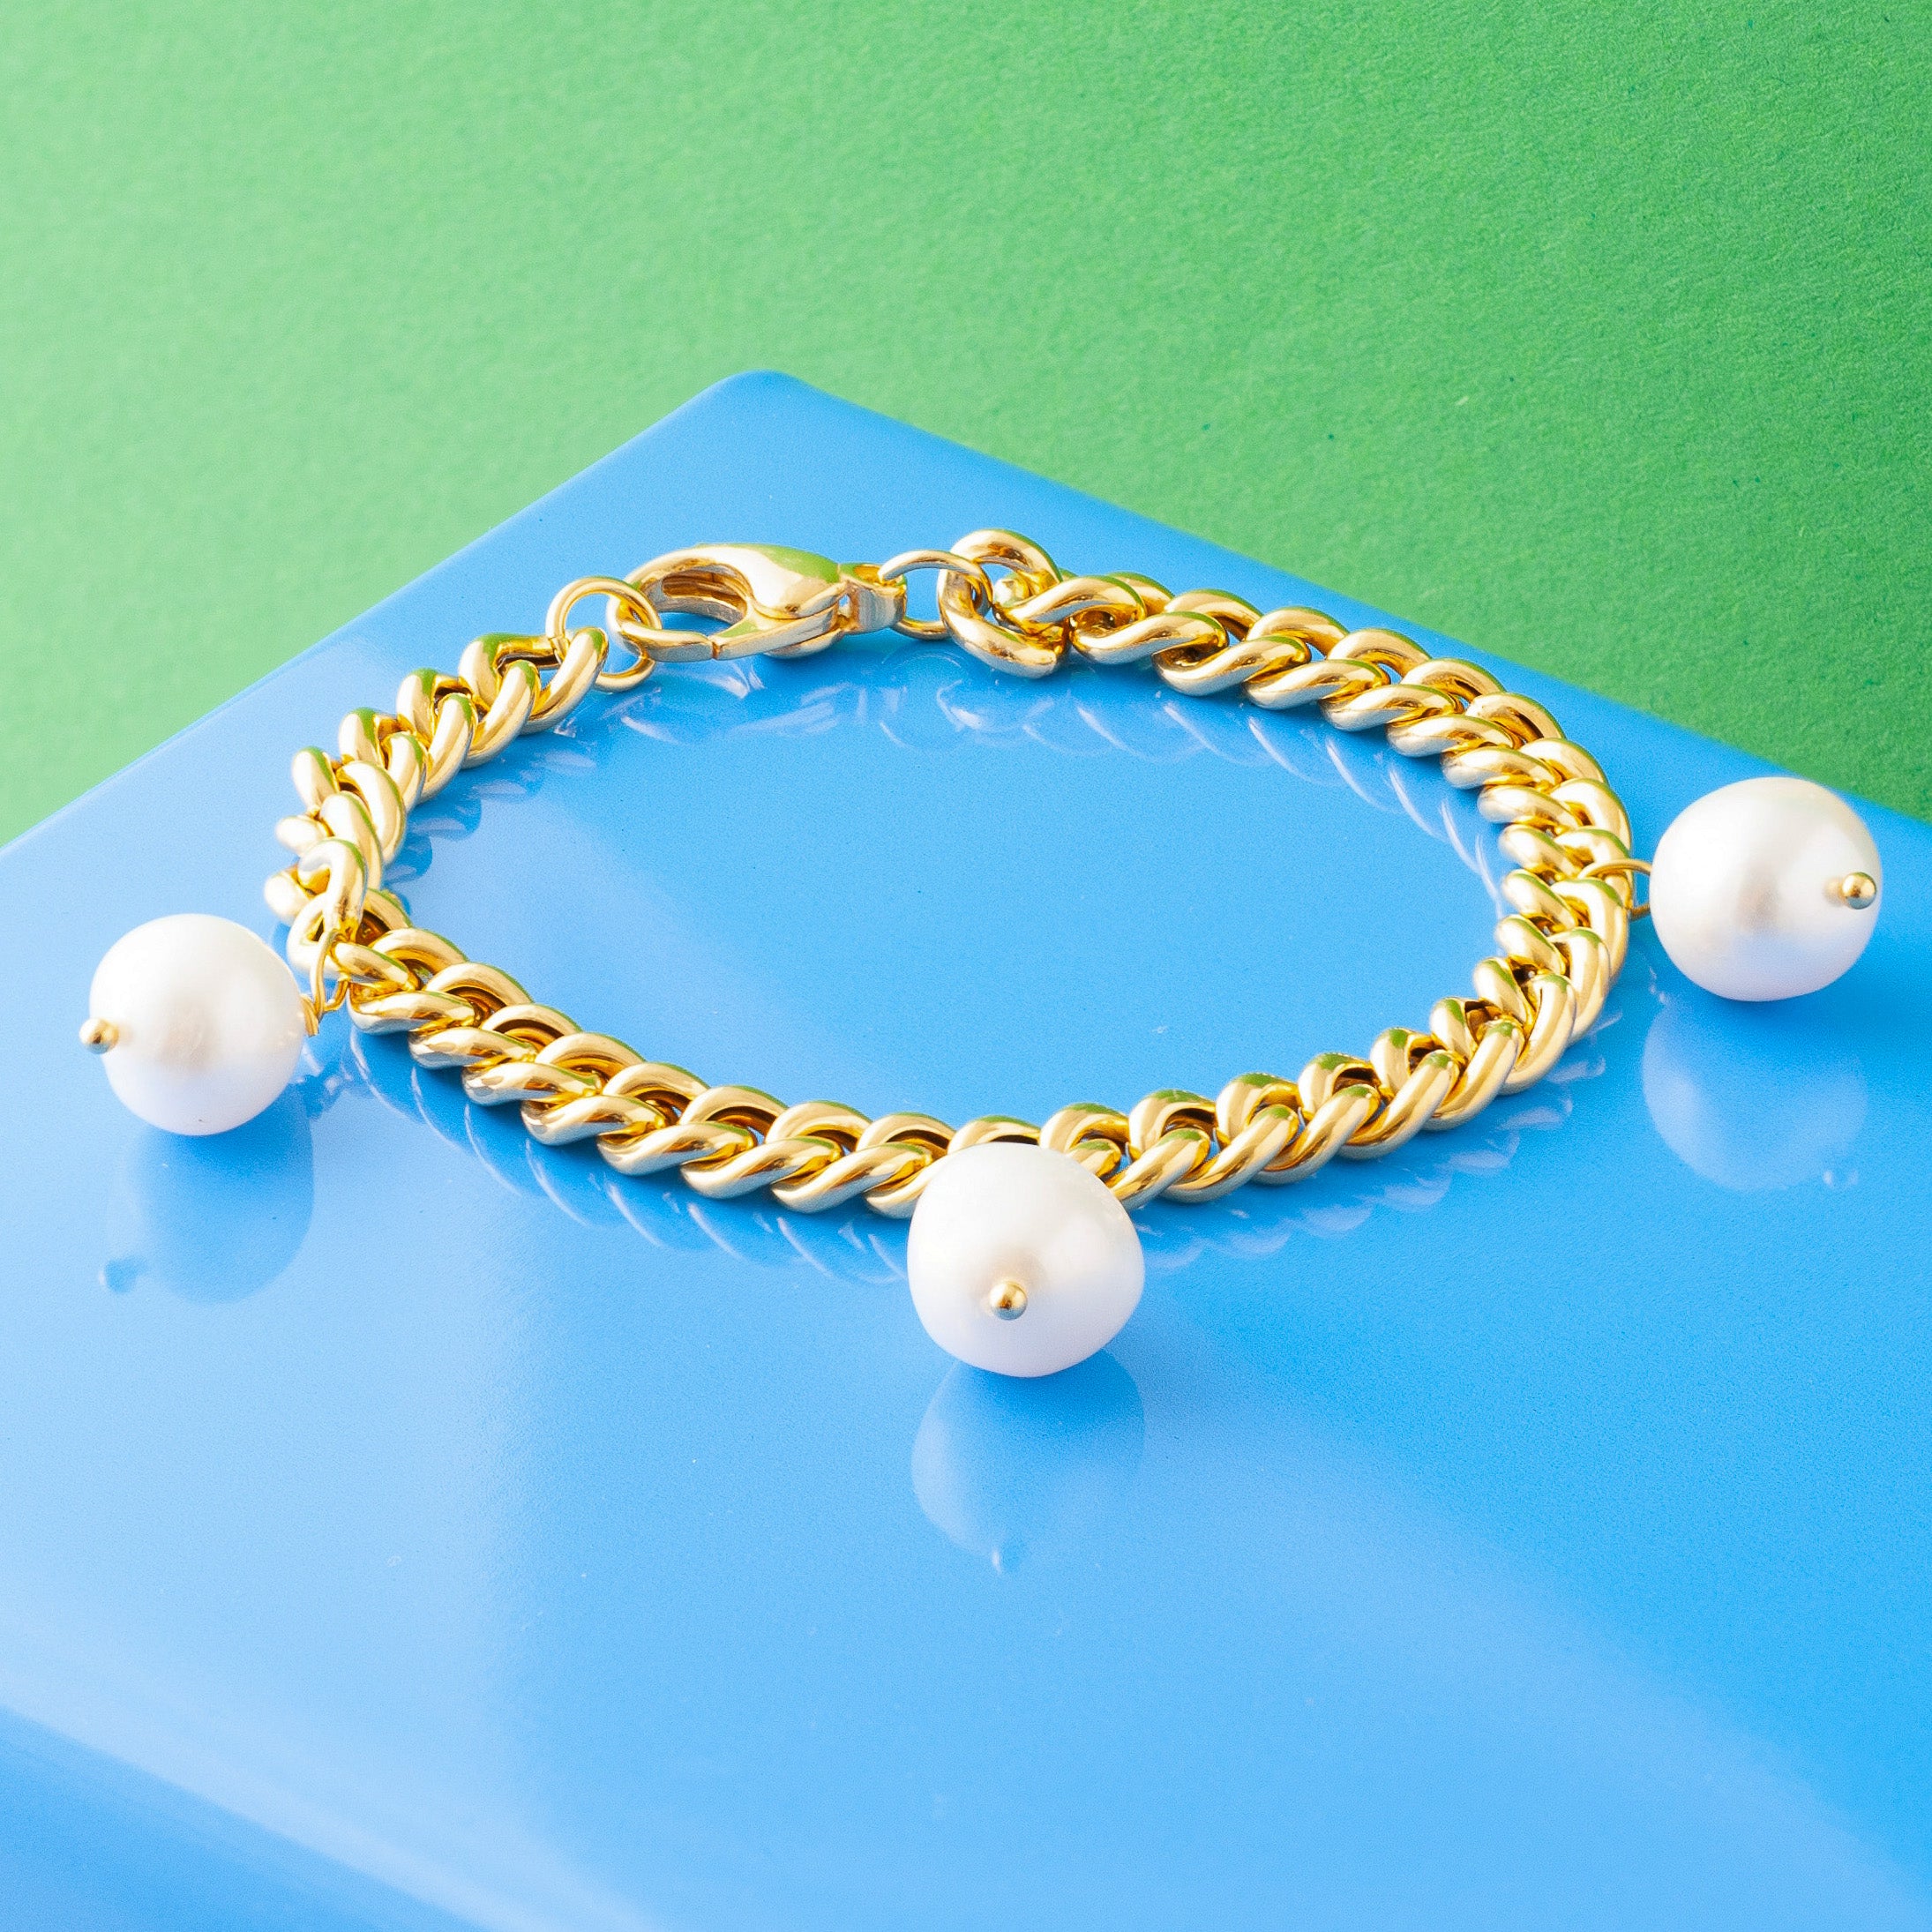 CHUNKY GOLD CURB CHAIN BRACELET WITH PEARL CHARMS